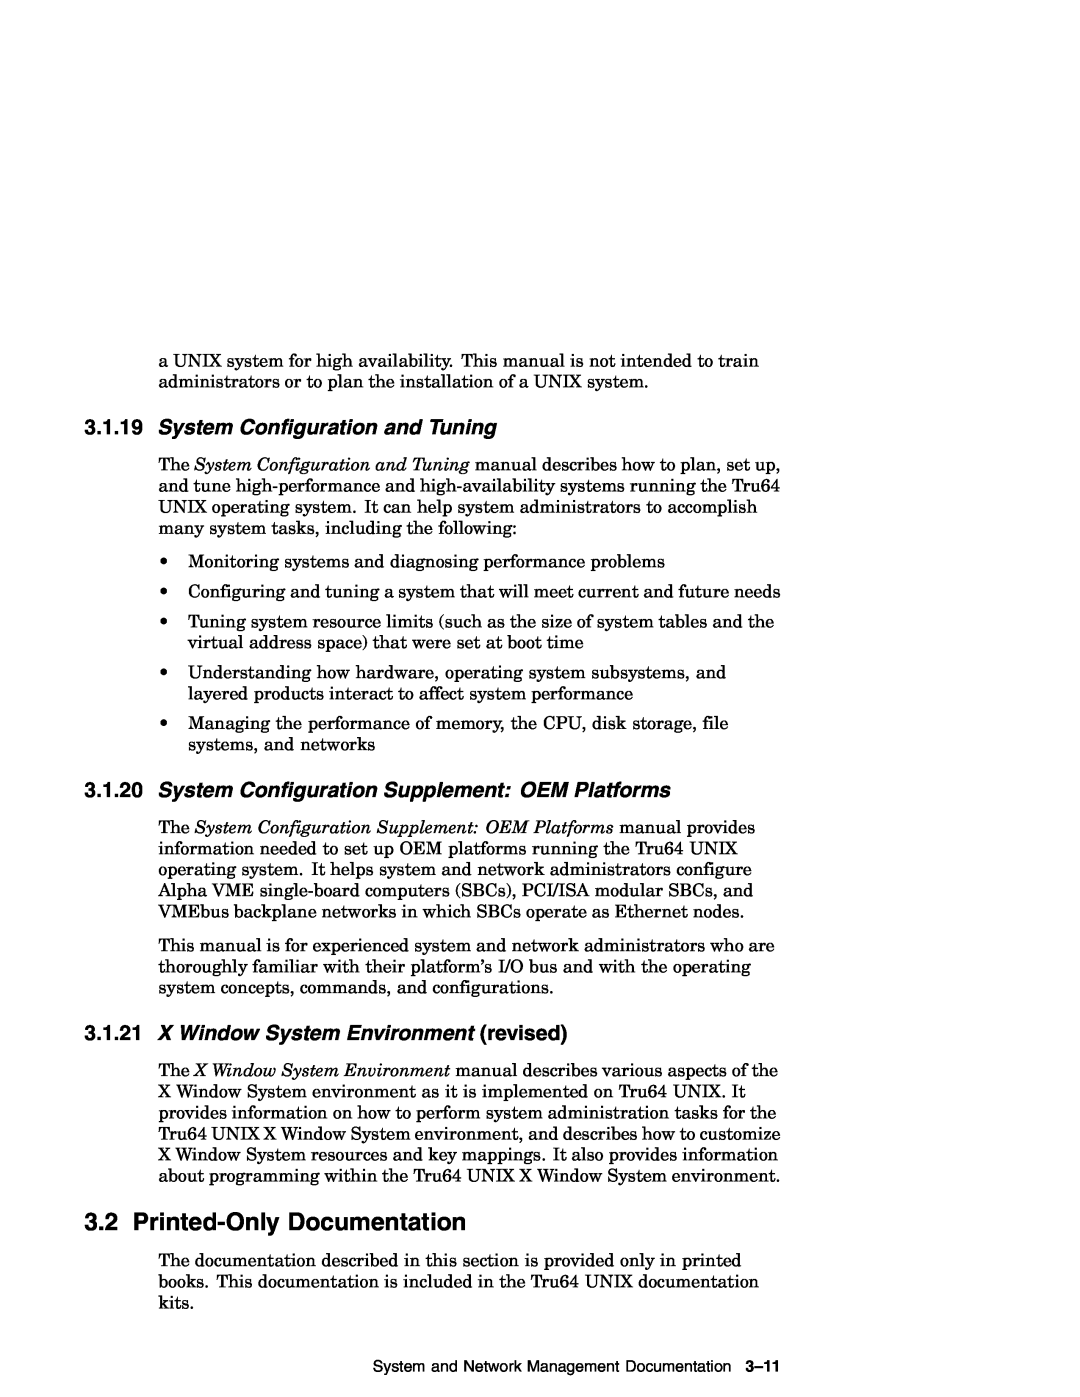 Compaq AA-RH8RD-TE manual Printed-Only Documentation, System Configuration and Tuning, X Window System Environment revised 